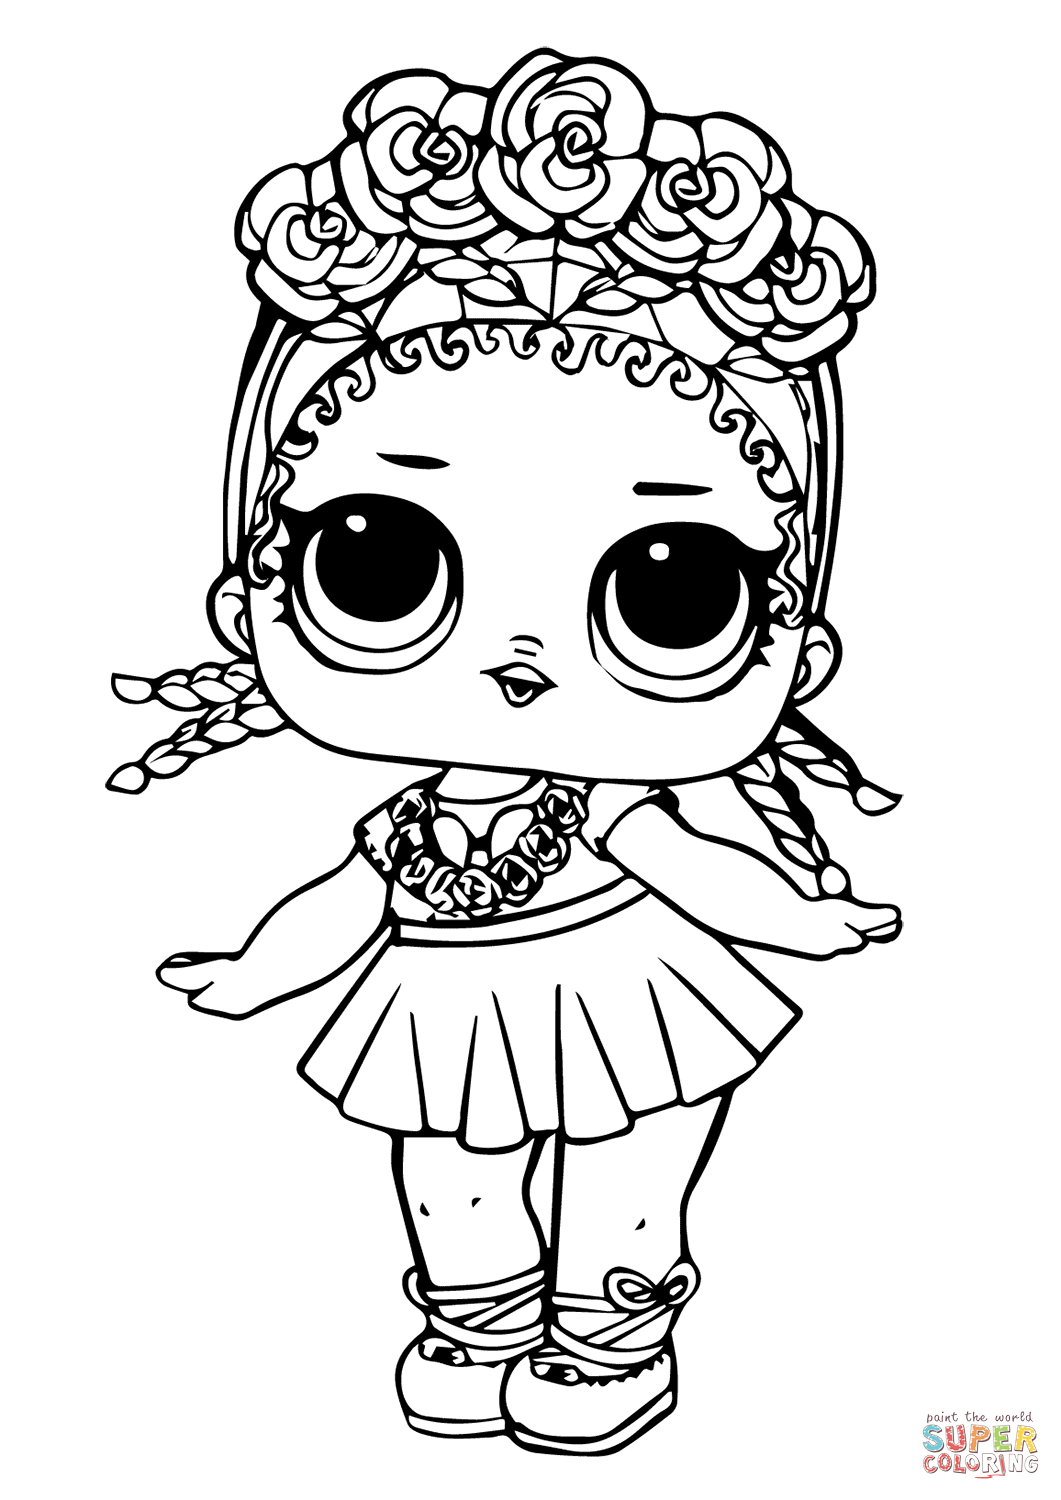 LOL Coloring Pages FREE Printable 6